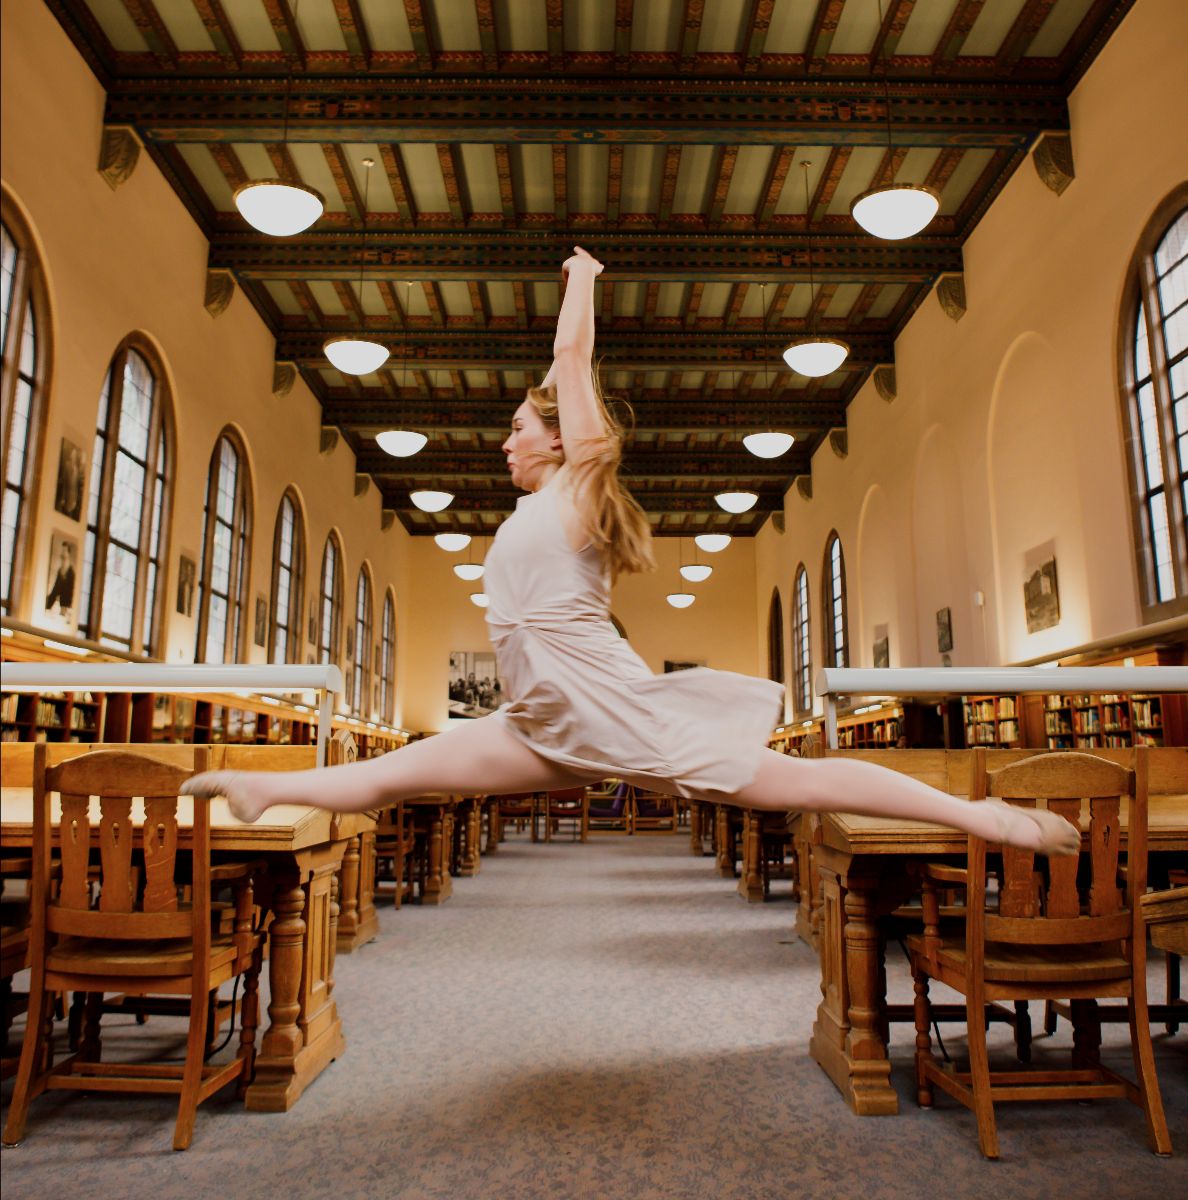 a dancer leaps between tables in an old fashioned library reading room